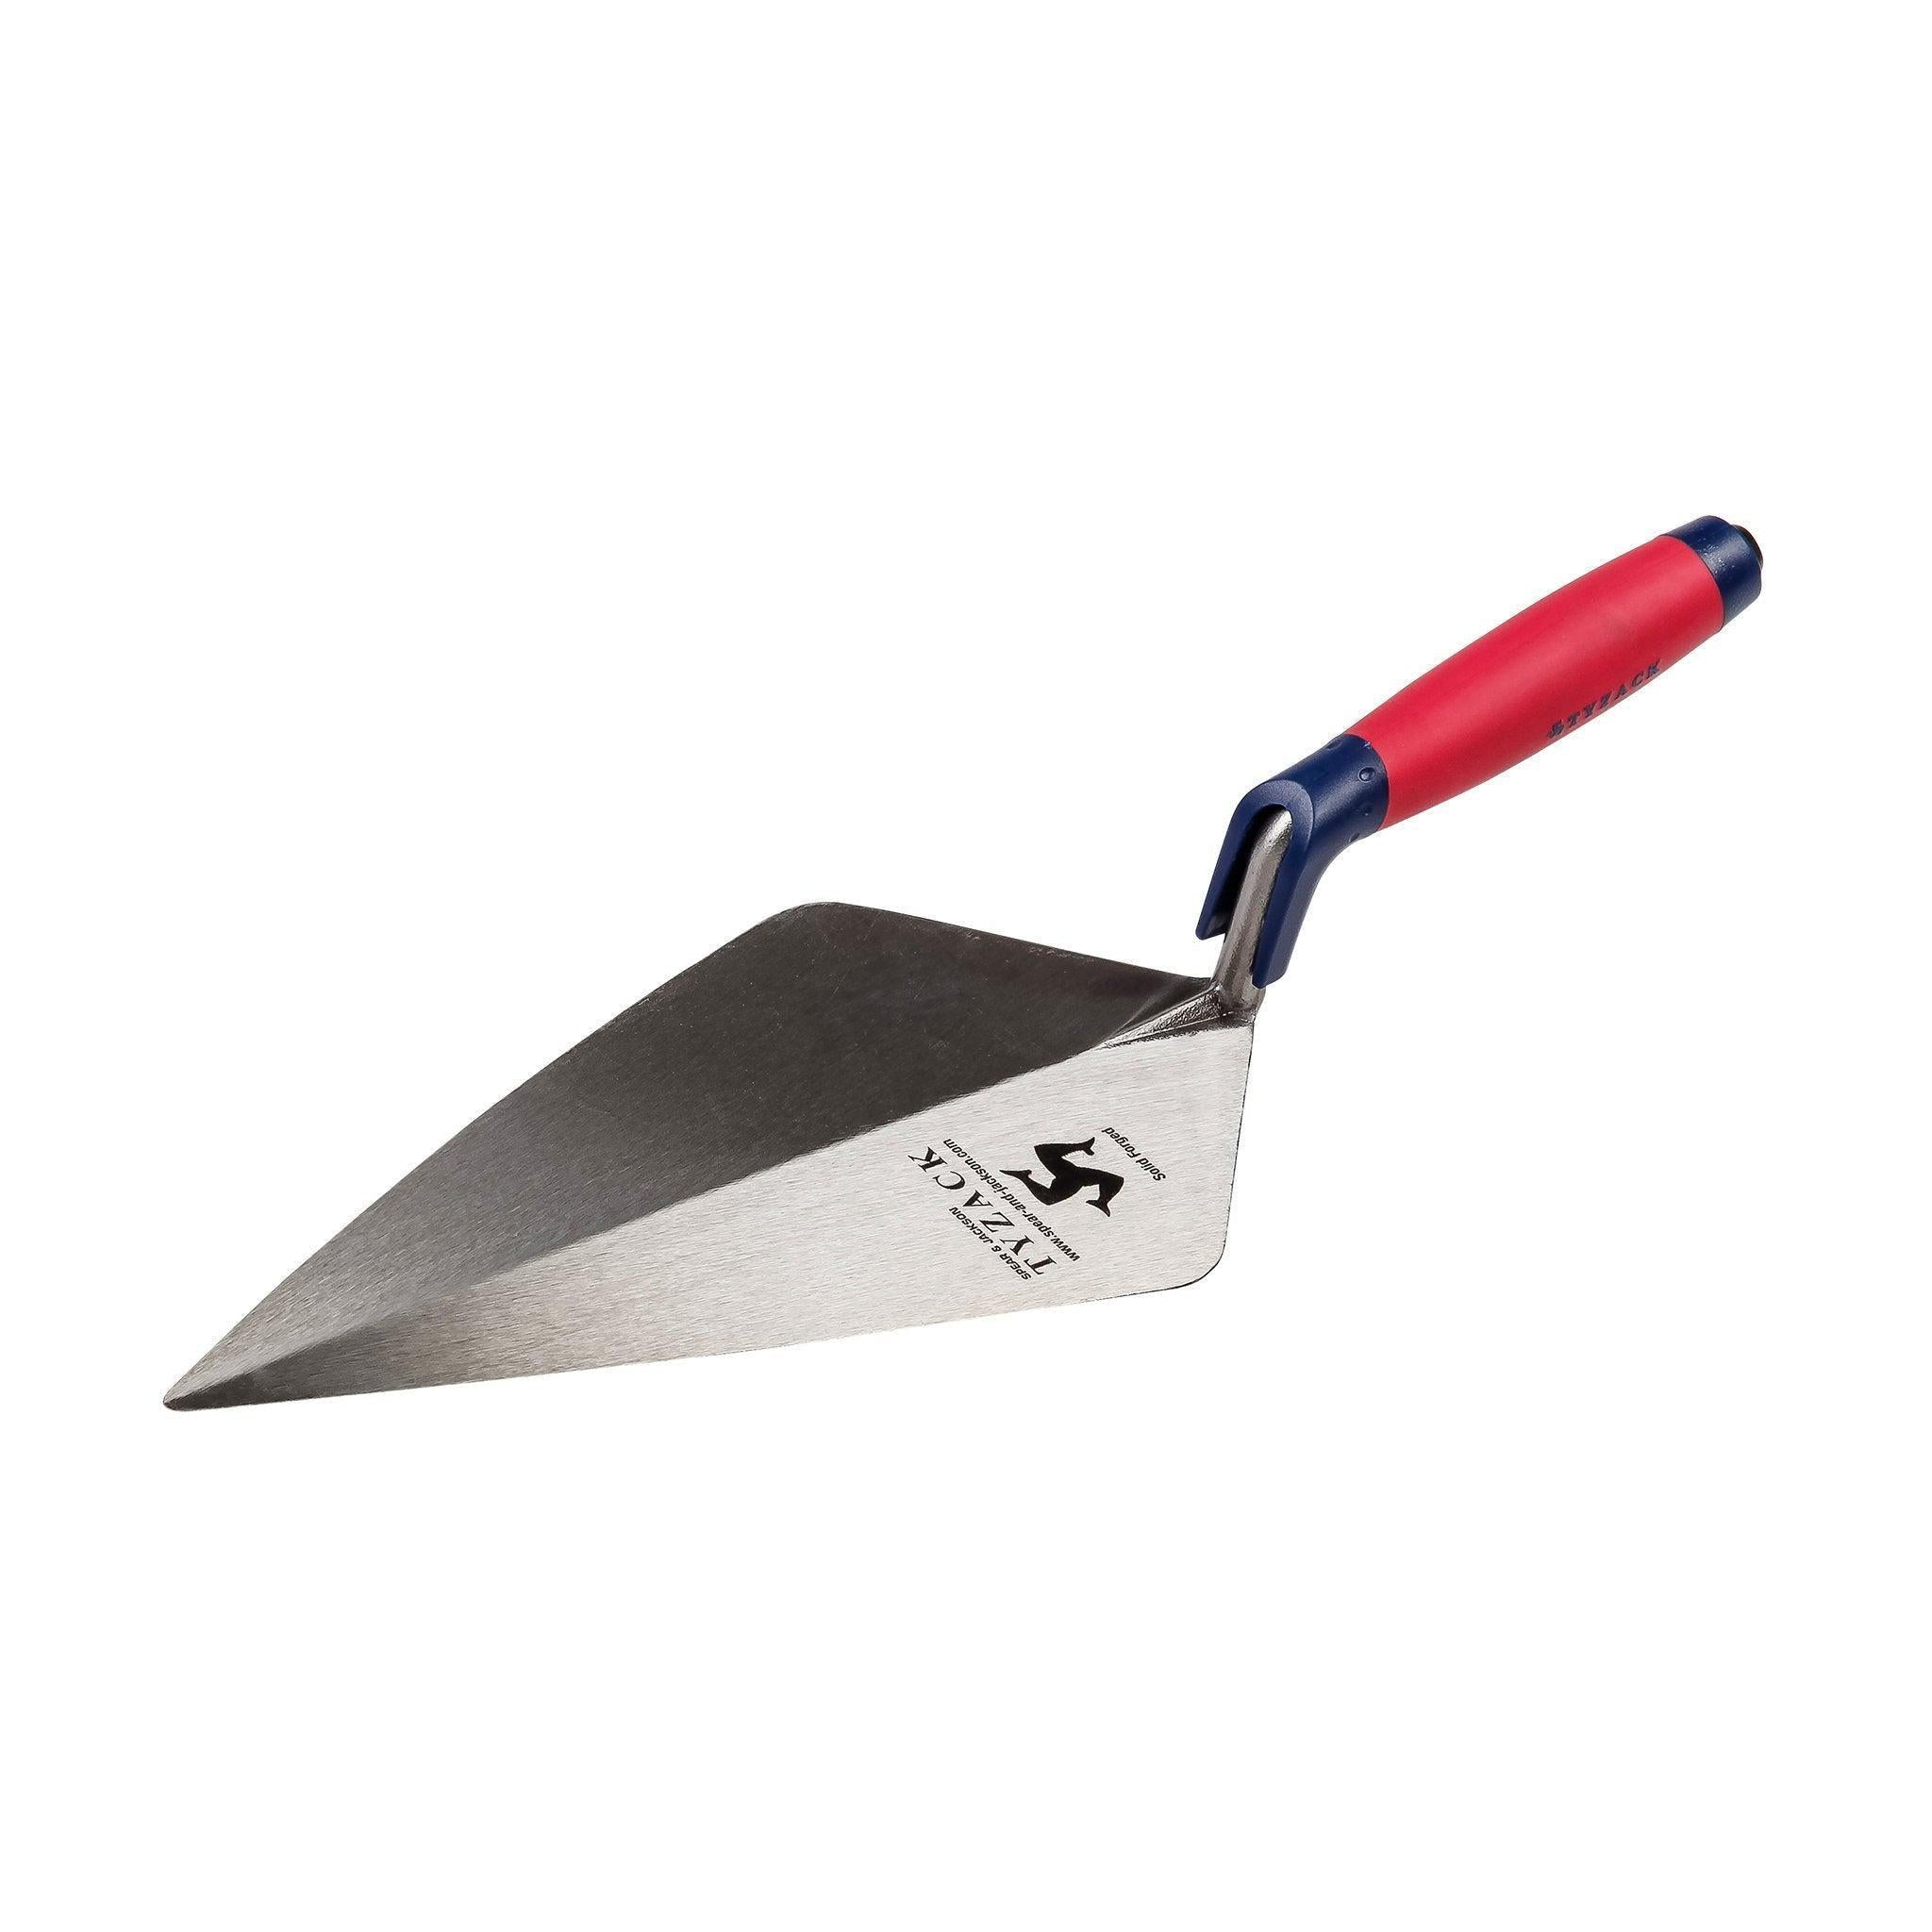 Tyzack Trowel - 12 London Pattern Soft Grip Handle Bricklaying Tools & Essentials